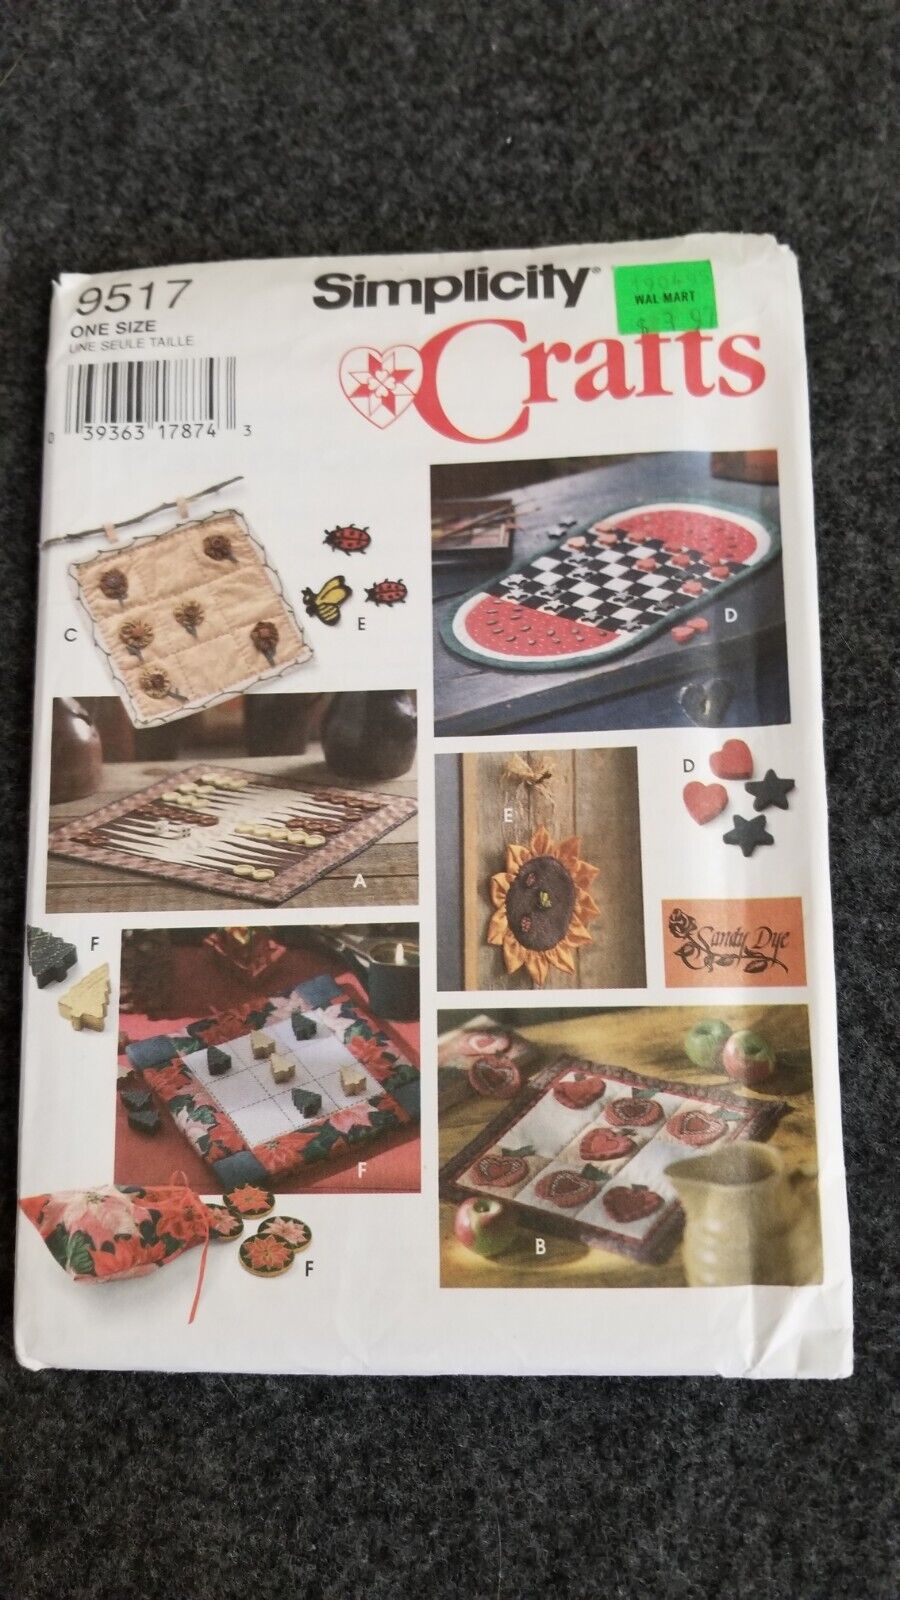 BACKGAMMON CHECKERS ... GAME BOARDS VTG SIMPLICITY 9517 CRAFTS Sewing Pattern UC